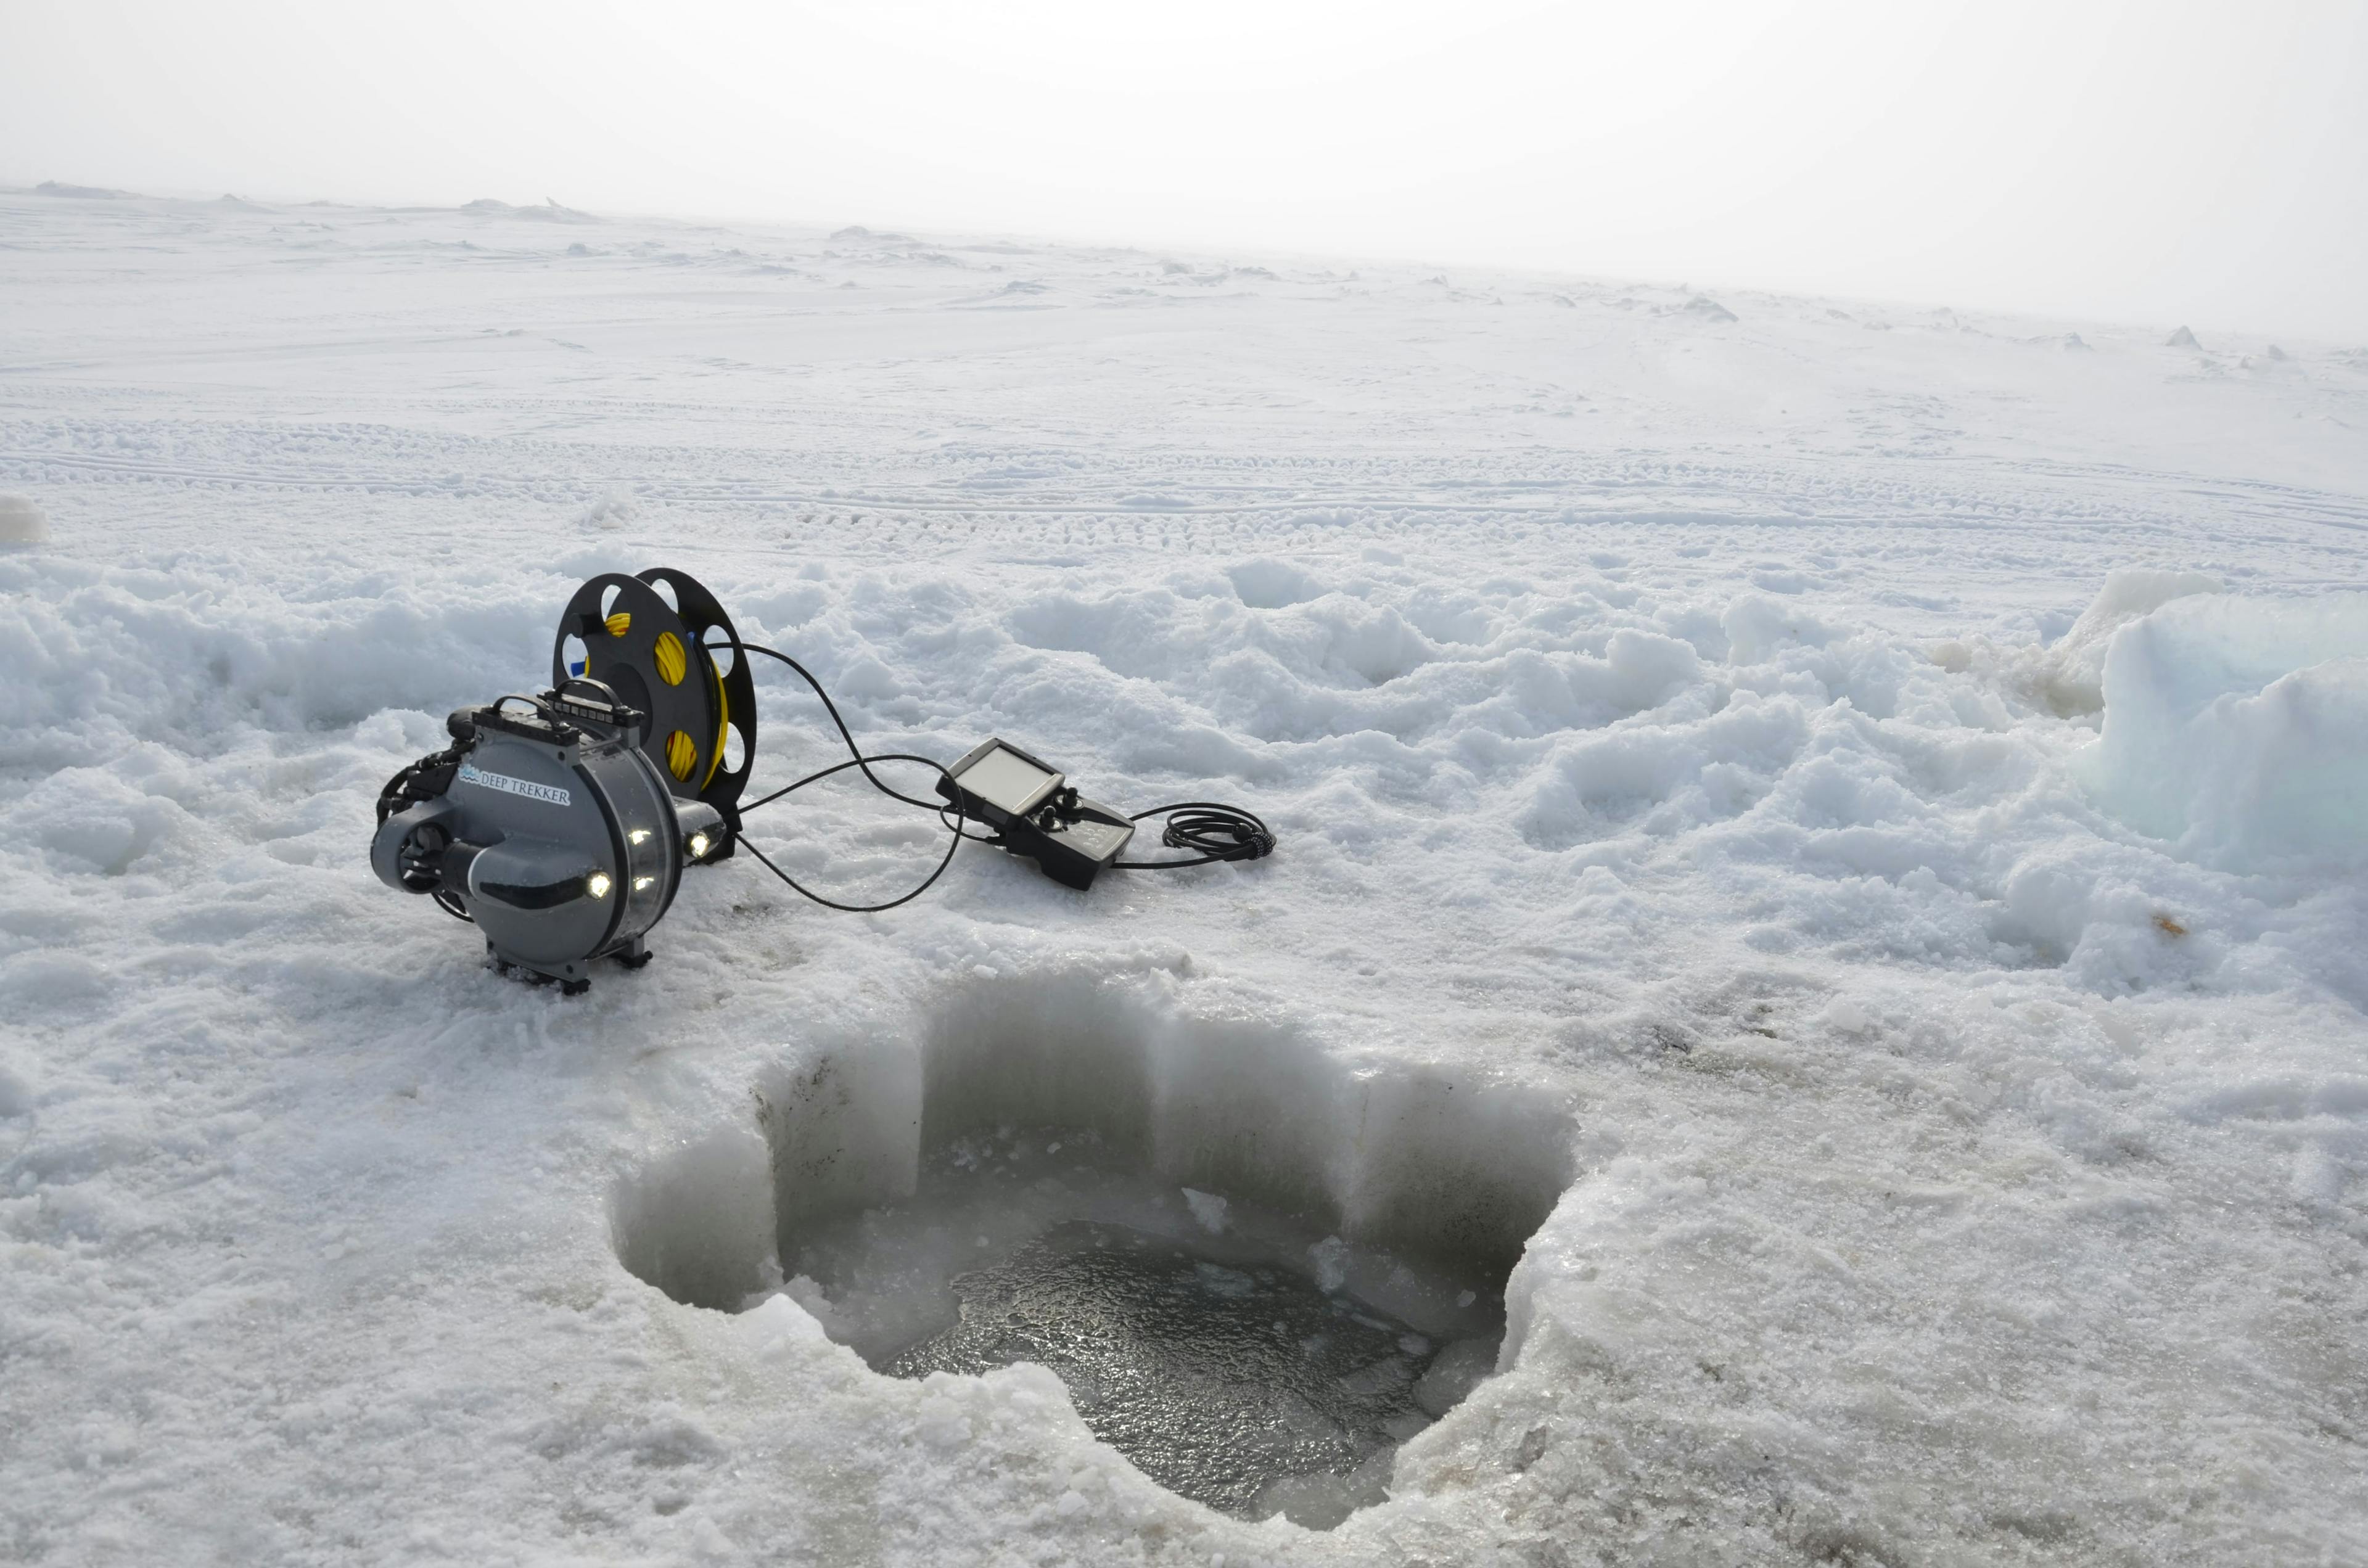 Lagoon covered in ice and snow with a large square drilled into the ice. Next to the hole is a Deep Trekker DTG3 remotely operated vehicle.